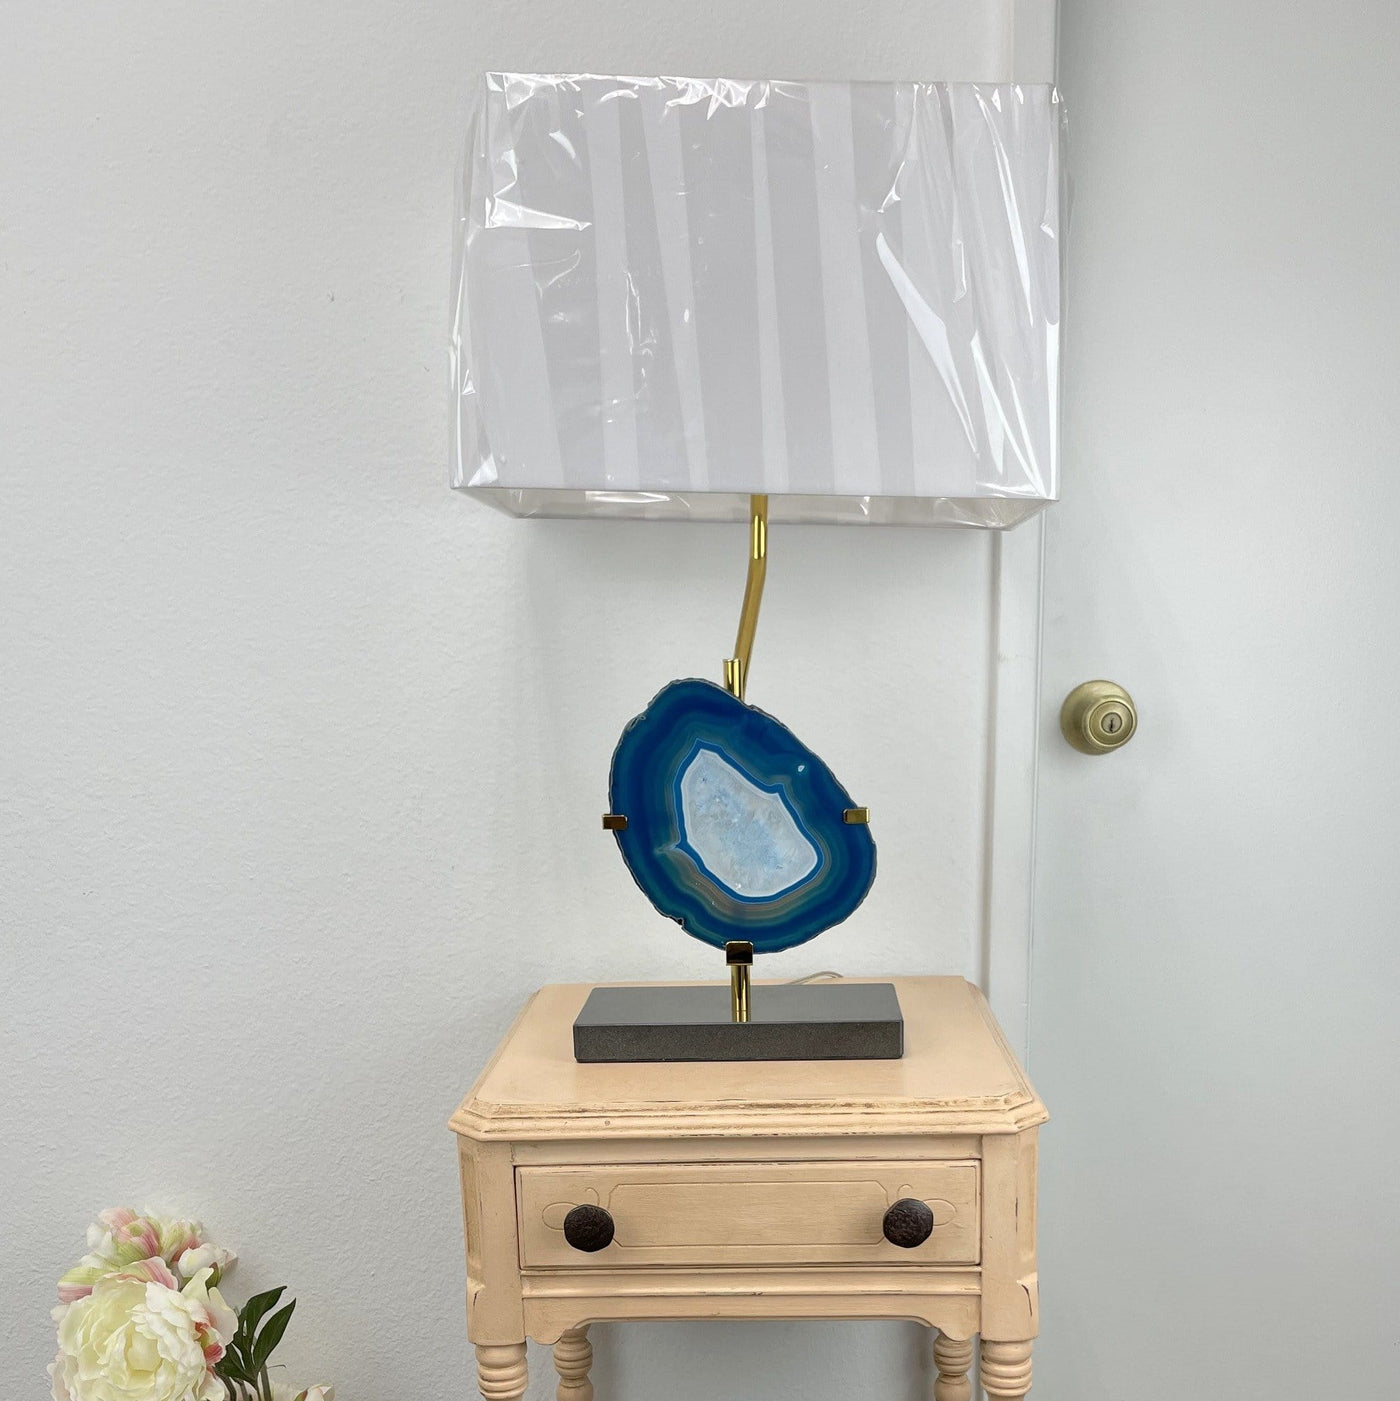 A teal agate slice on a gold lamp on top of a table , The lamp Measures approx: stone base 9.25" x 4.5", white shade 9.5" x 14.5", Total height 25.5" 